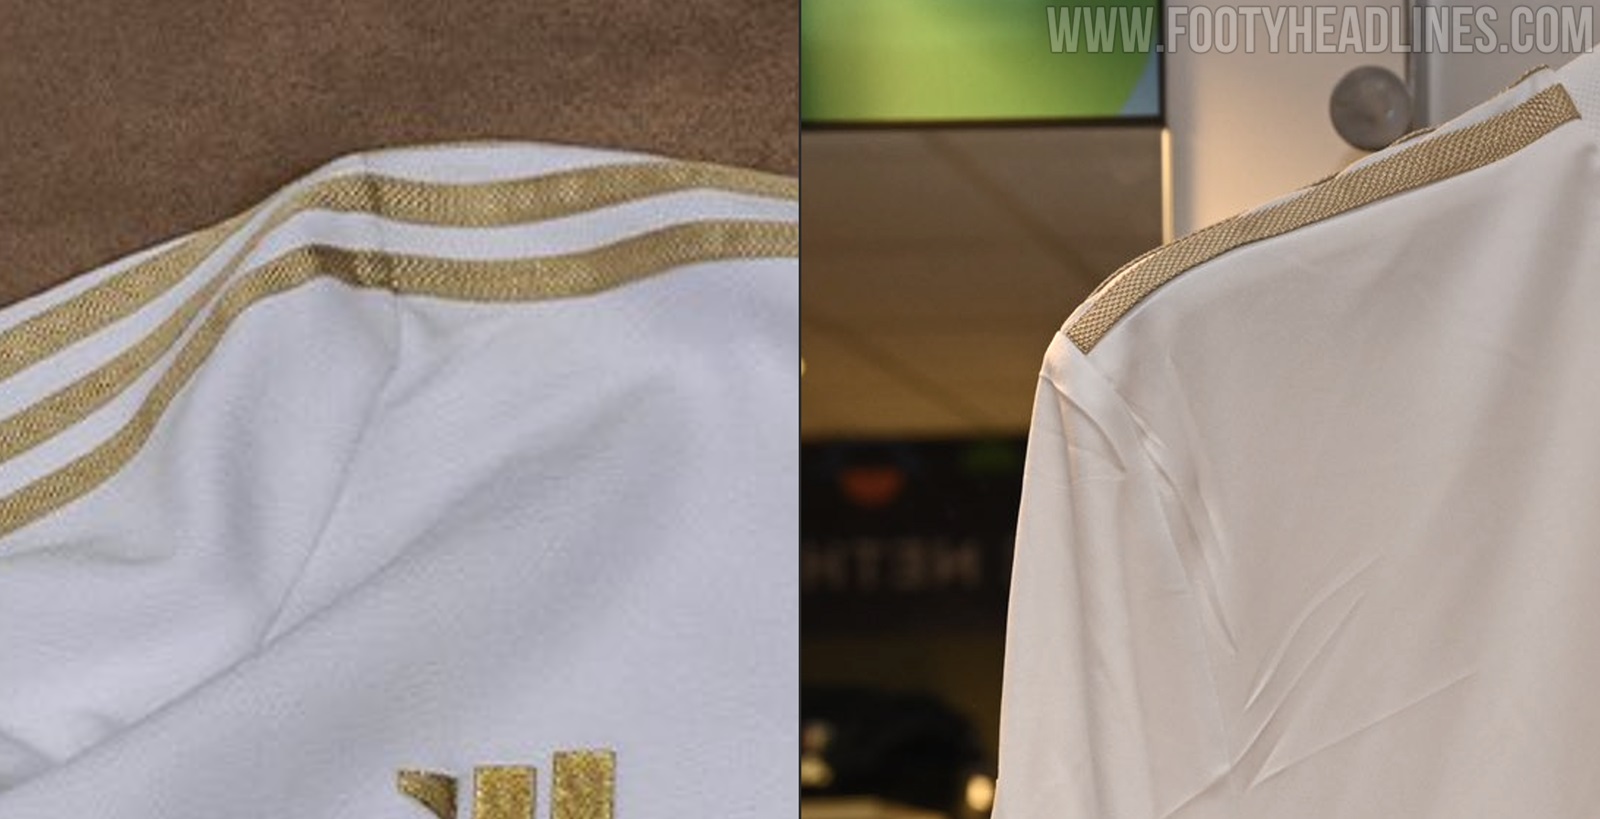 Confirmed: Full Three Stripes Removed For Adidas Italy 125 Years Anniversary  Kit Debut - Footy Headlines